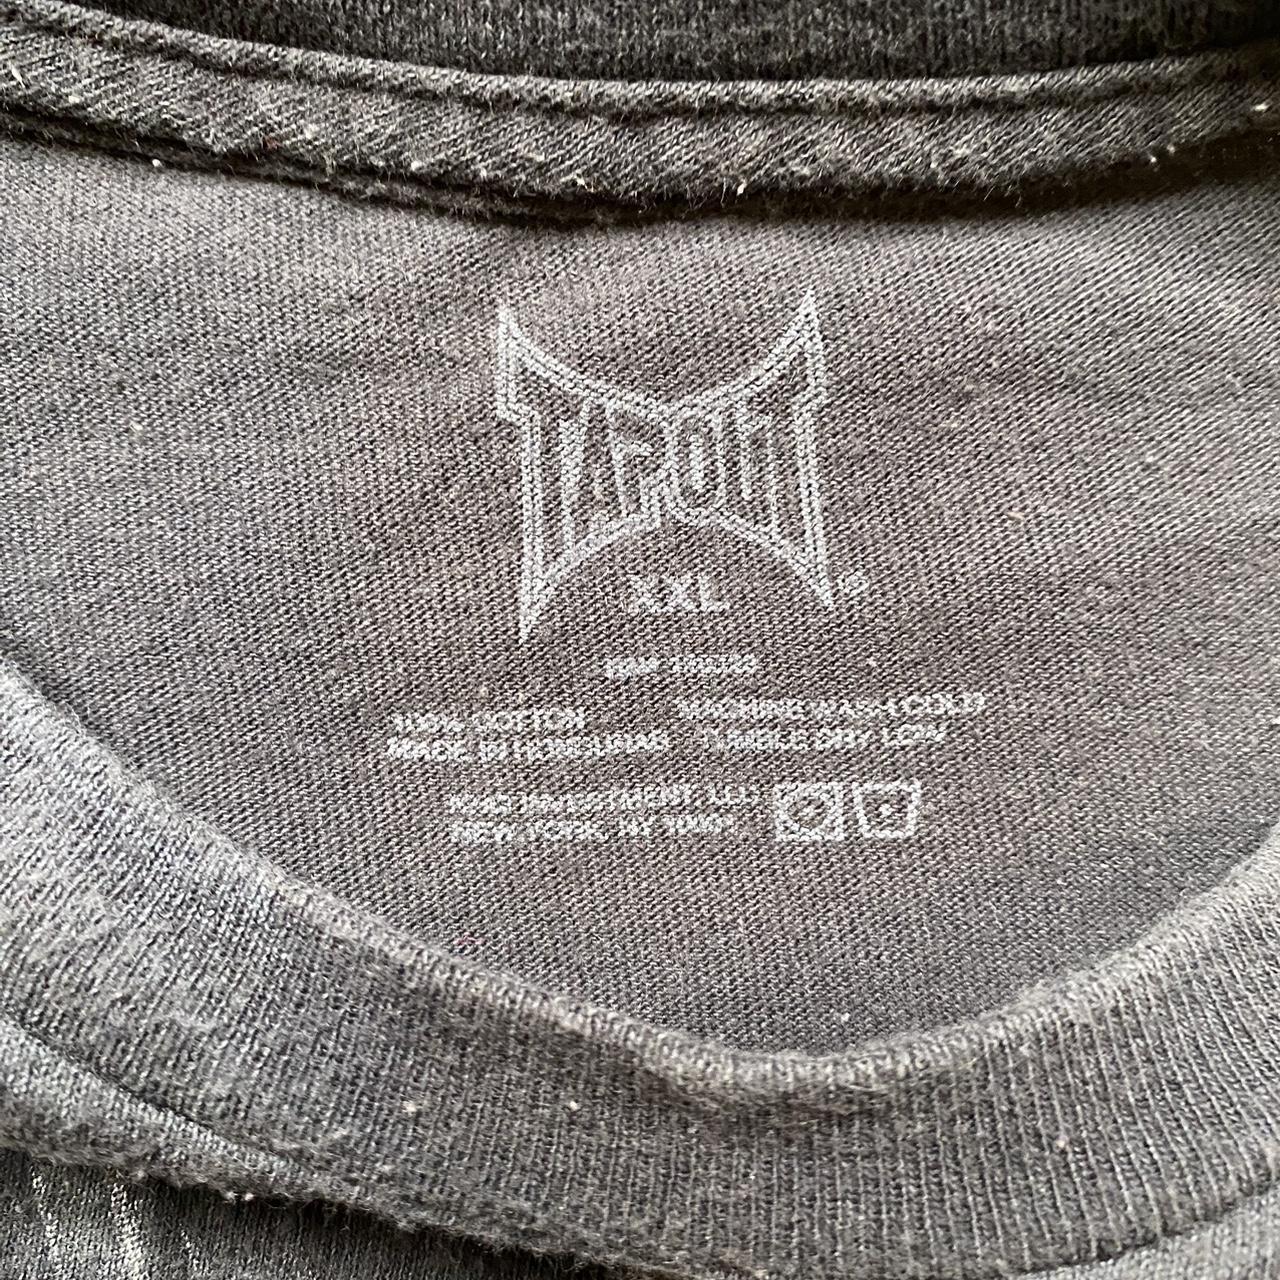 Tapout Shirt Fire graphic shirt the sizing is a... - Depop